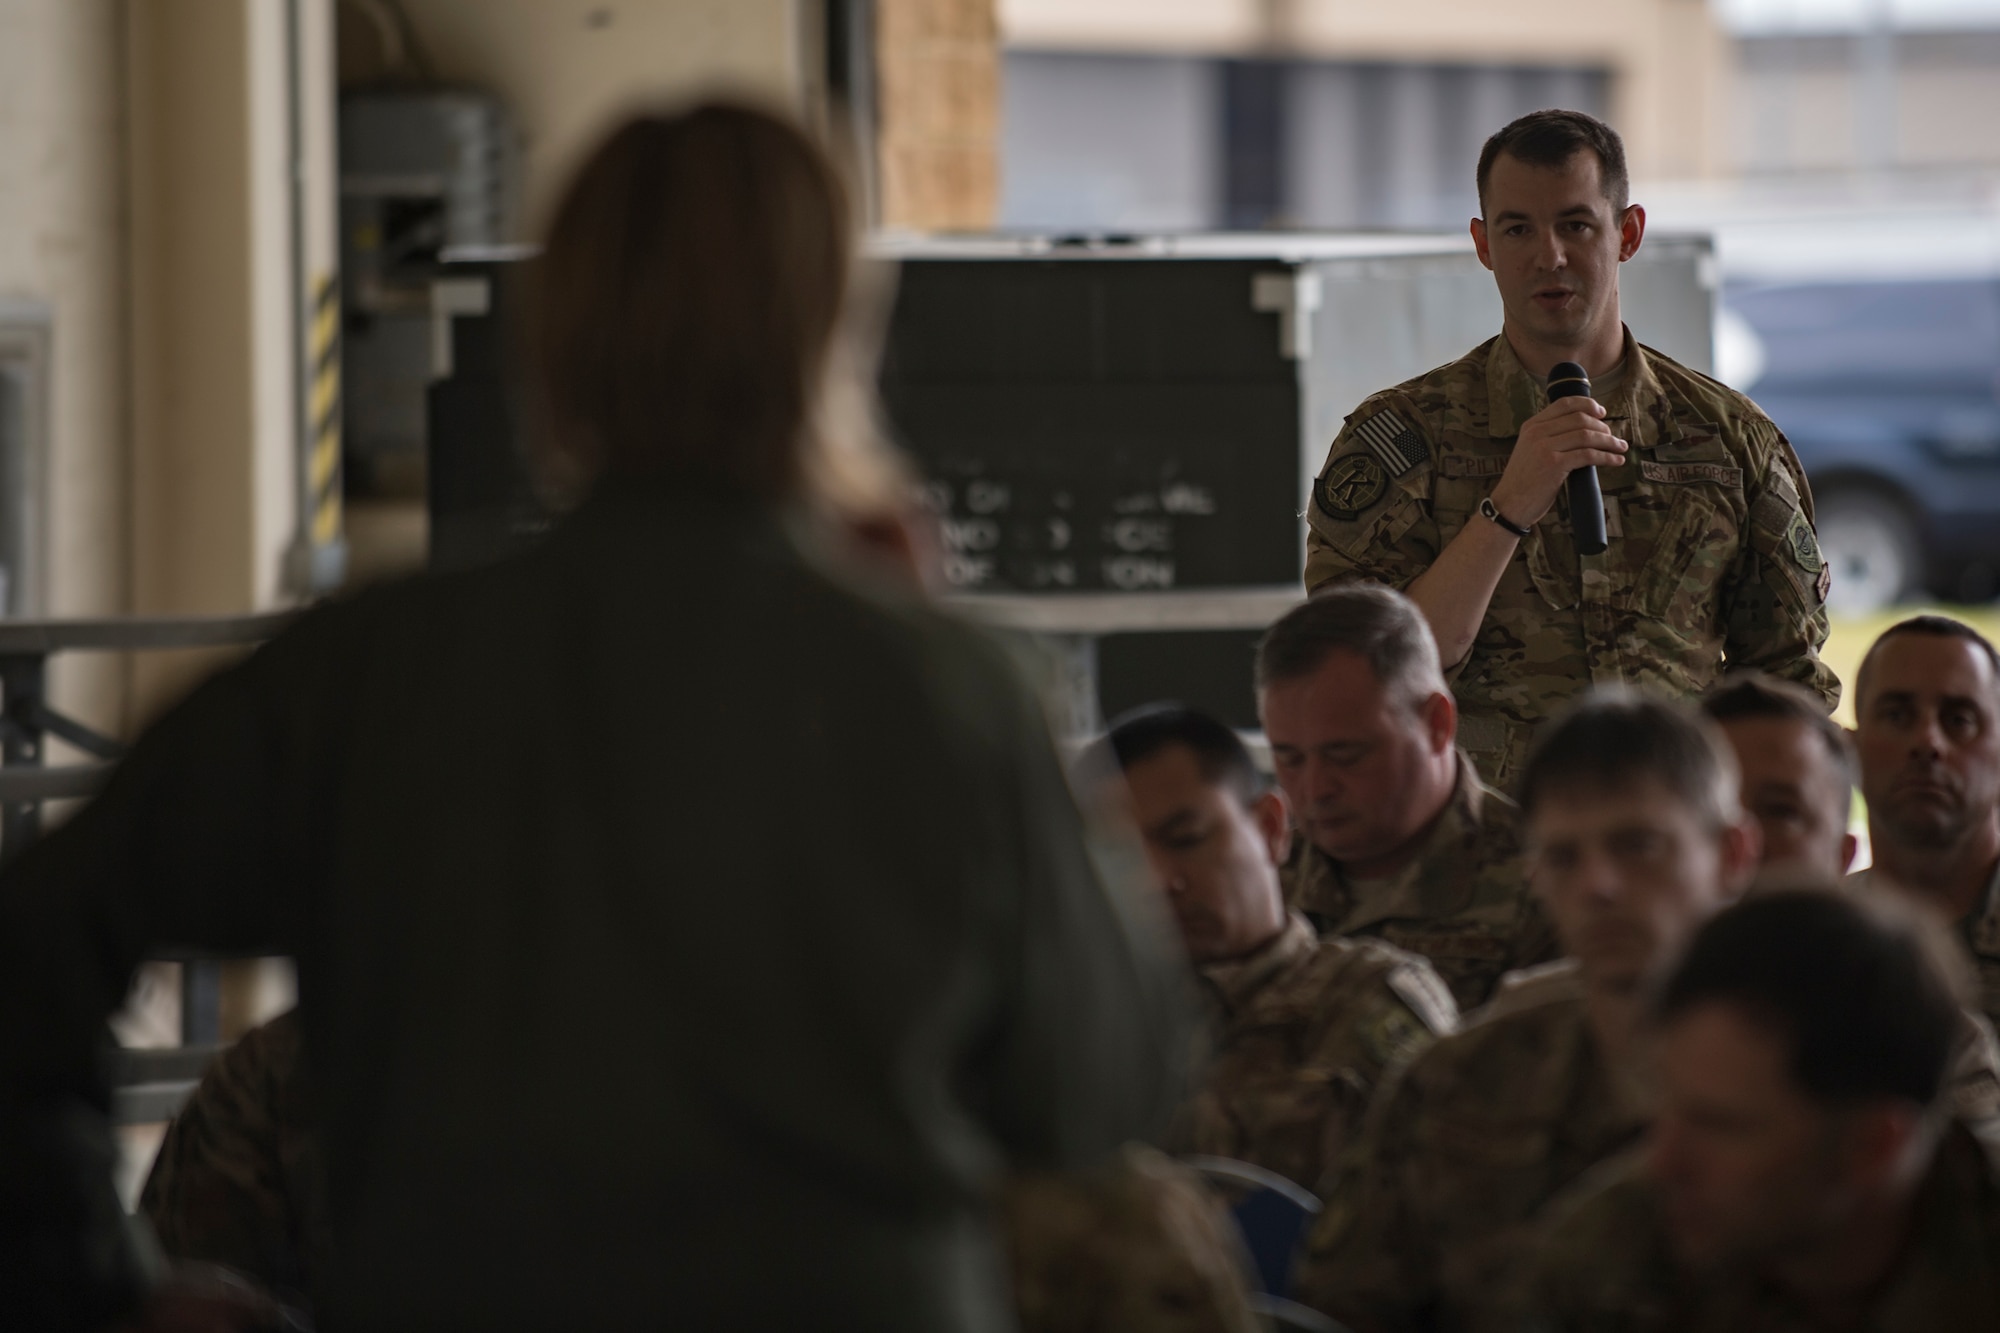 Maj. Cory Pilinko, 71st Rescue Squadron HC-130J Combat King II weapons officer, , participates in an open forum with Col. Jennifer Short, 23d Wing commander, during a one-day operational safety review, May 14, 2018, at Moody Air Force Base, Ga. During the safety review, the commander-led forum gathered feedback from Airmen who execute the Air Force's flying and maintenance operations and challenged them to identify issues that may cause a future mishap. (U.S. Air Force photo by Senior Airman Daniel Snider)